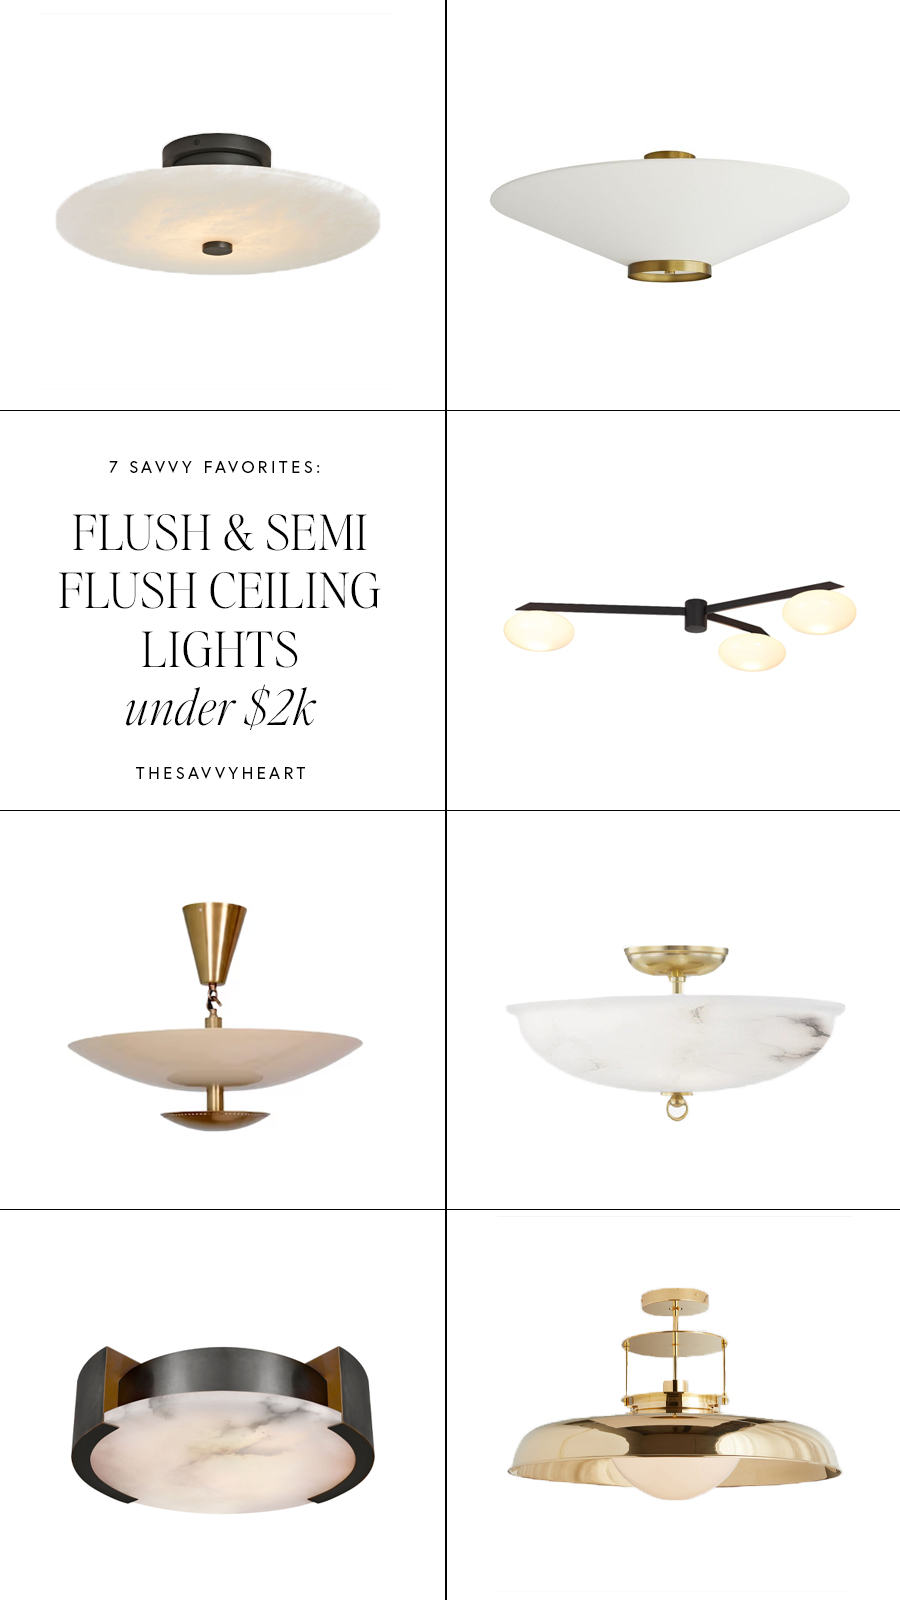 Searching for the perfect semi flush or flush lighting fixture? I rounded up 21 lights that are modern and transitional for every budget. See my designer picks.